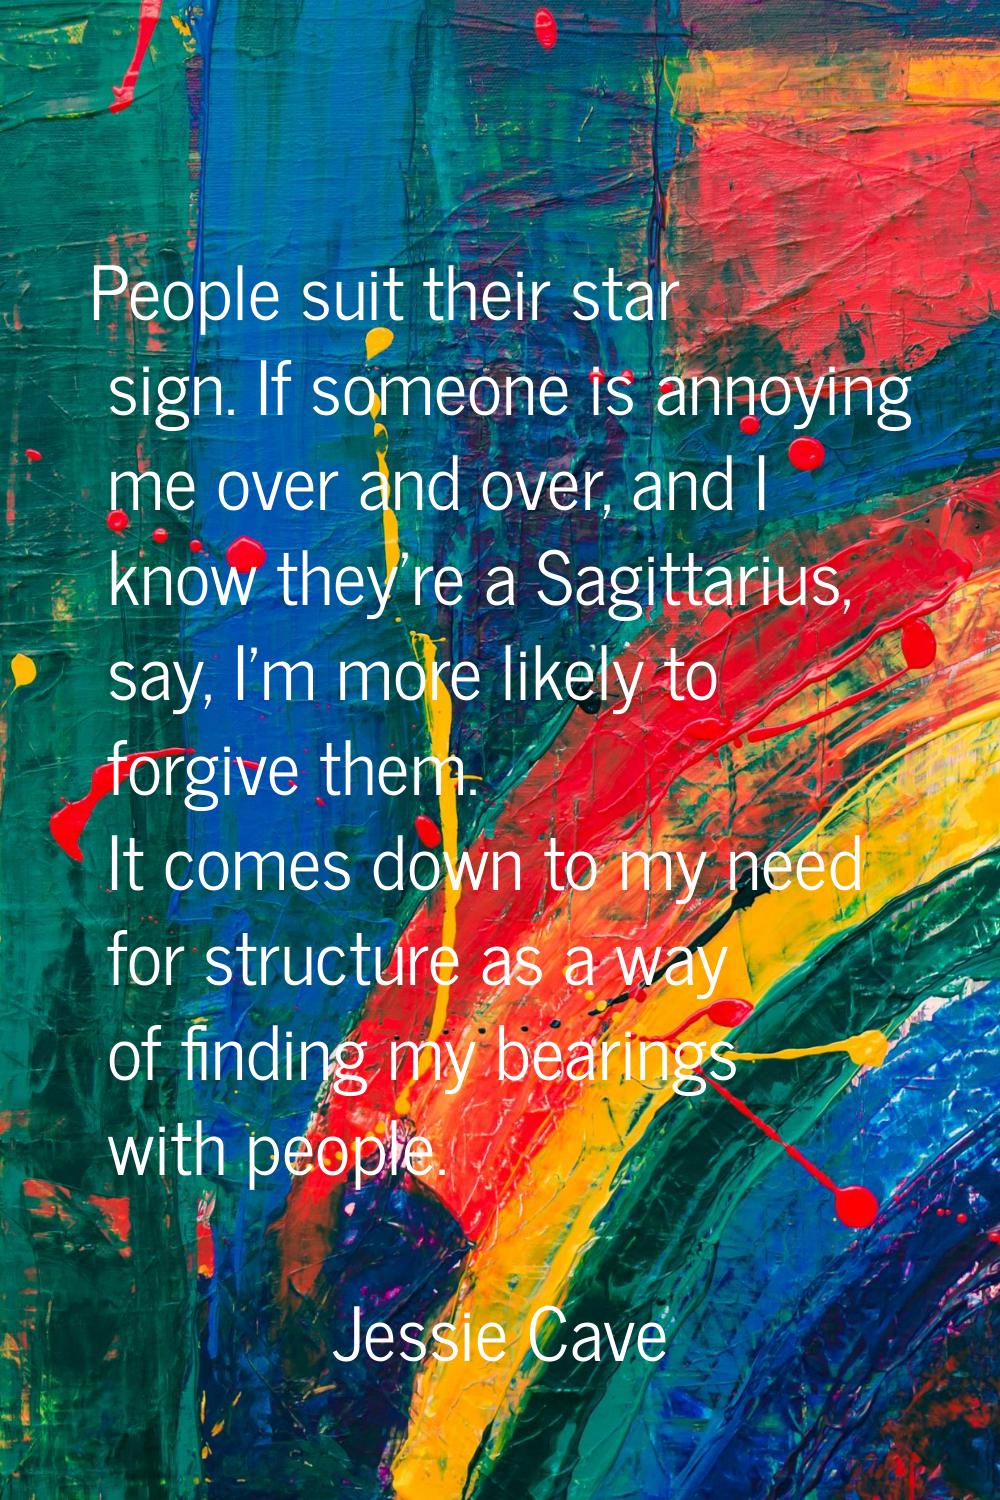 People suit their star sign. If someone is annoying me over and over, and I know they're a Sagittar